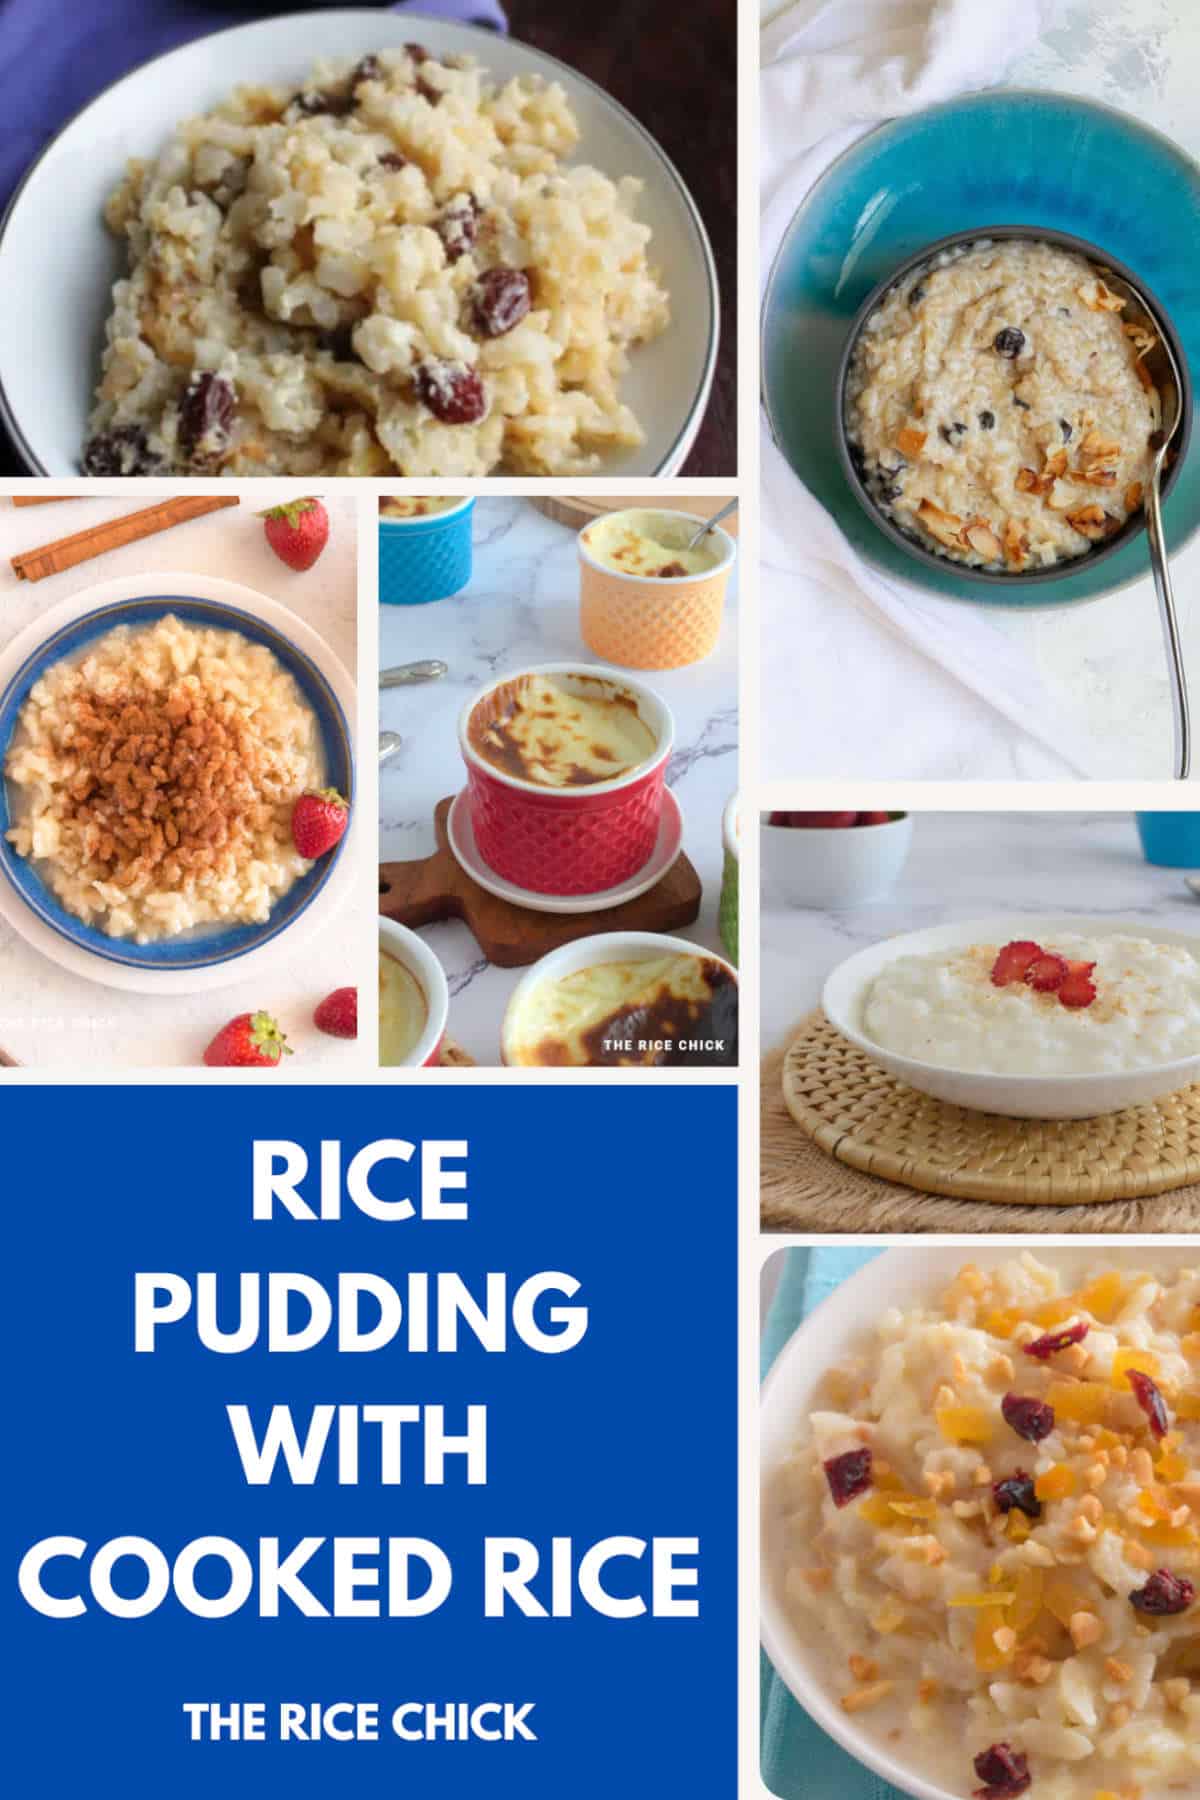 Rice pudding with cooked rice recipes.